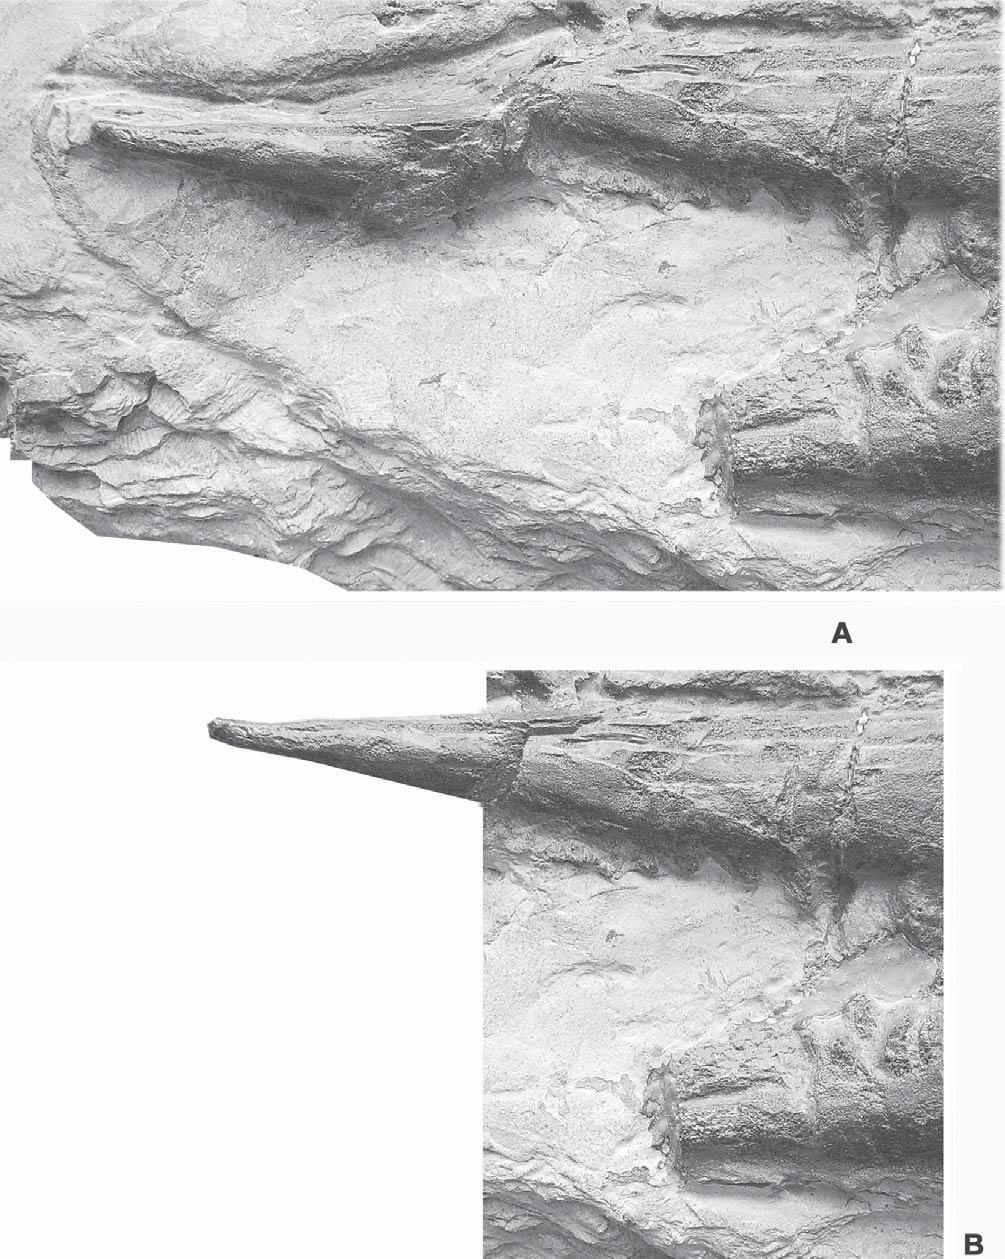 MAISCH: XINPUSAURUS FROM THE TRIASSIC OF CHINA 51 Fig. 4.